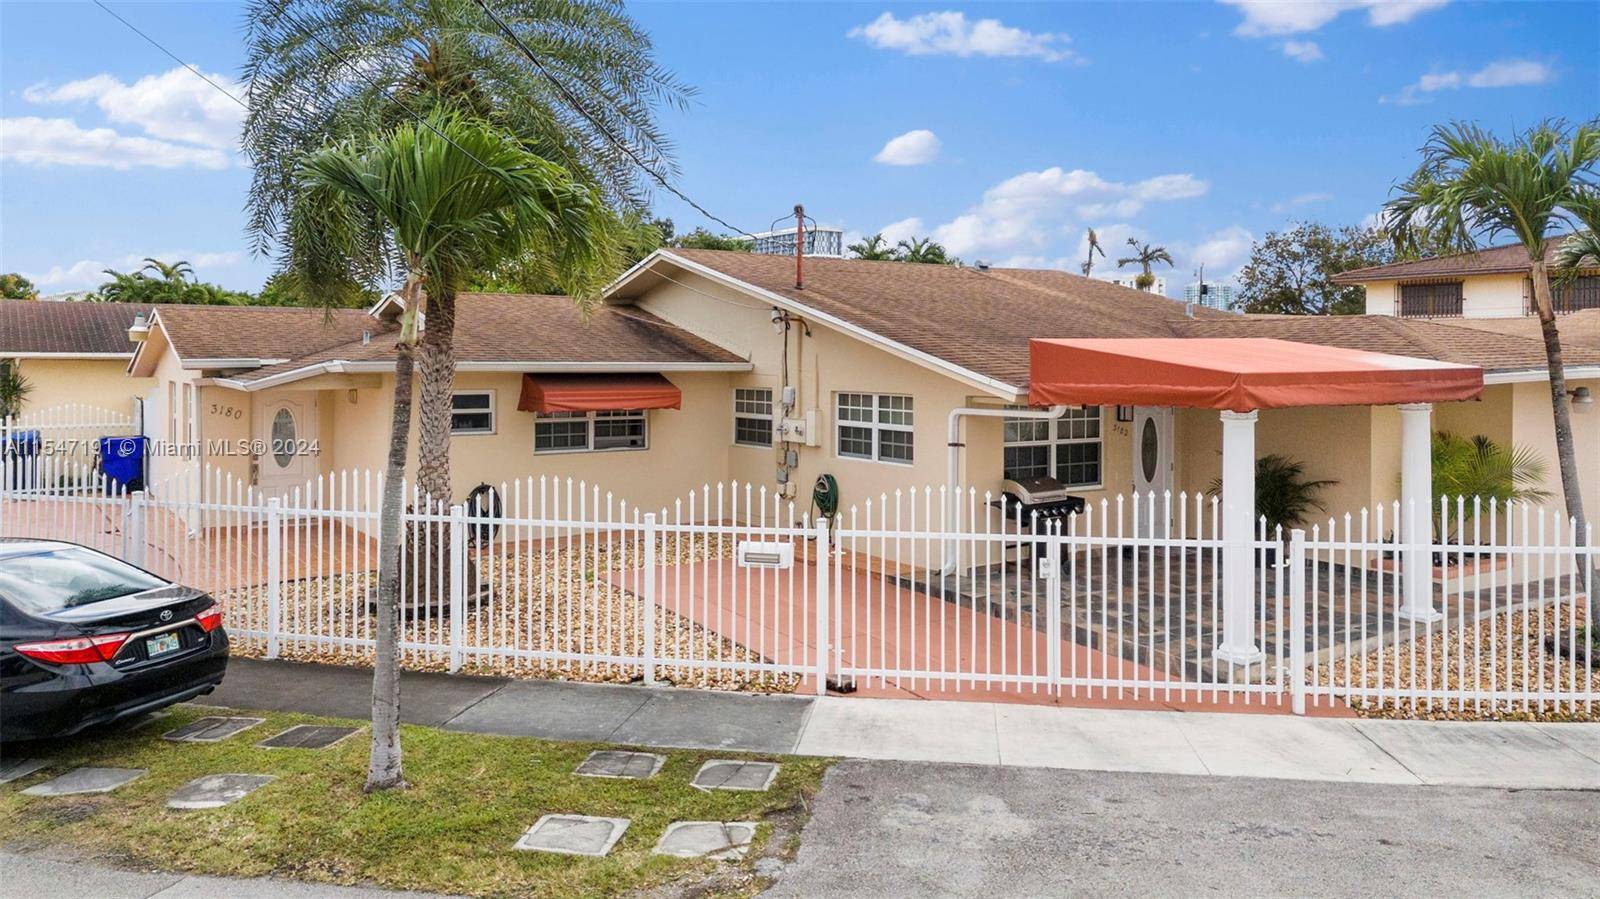 Explore Miami living in this corner lot duplex nestled between Coral Gables and Coconut Grove.